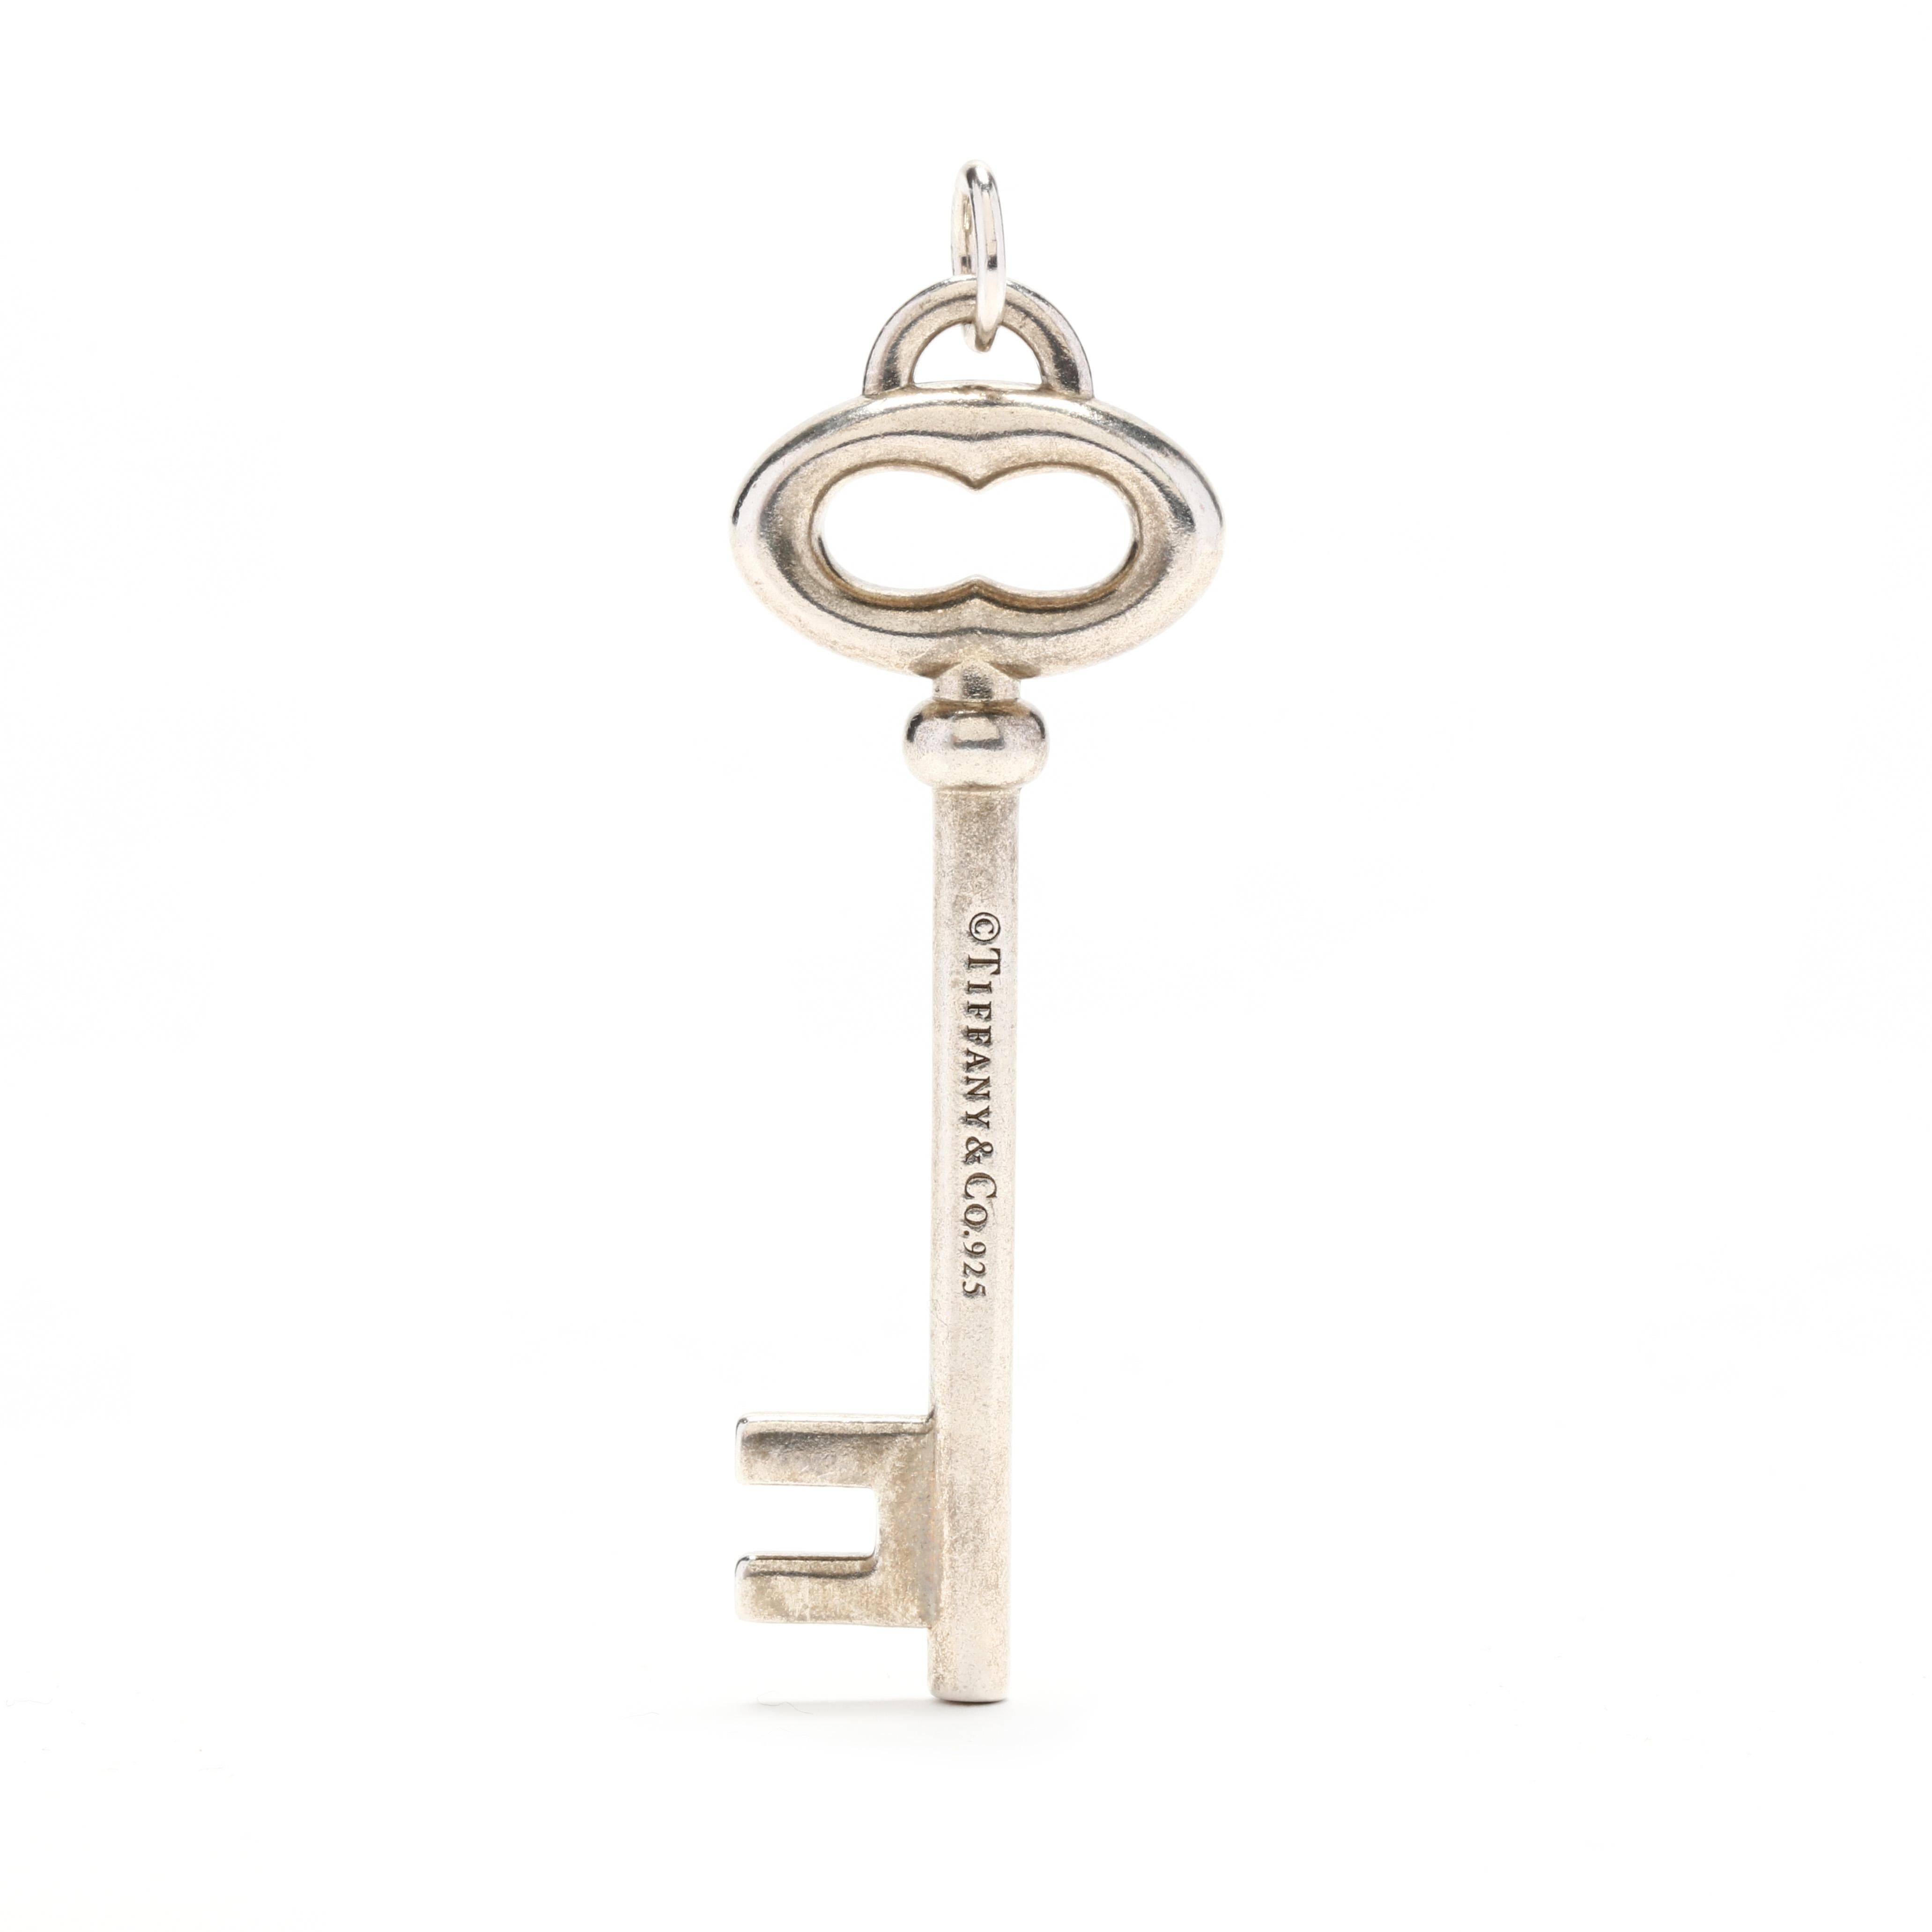 A Tiffany & Company sterling silver key large key pendant. This charm features a simple key motif with an oval jump ring.



Length: 2.25 in.



Width: 11/16 in.



Weight: 9.2 grams